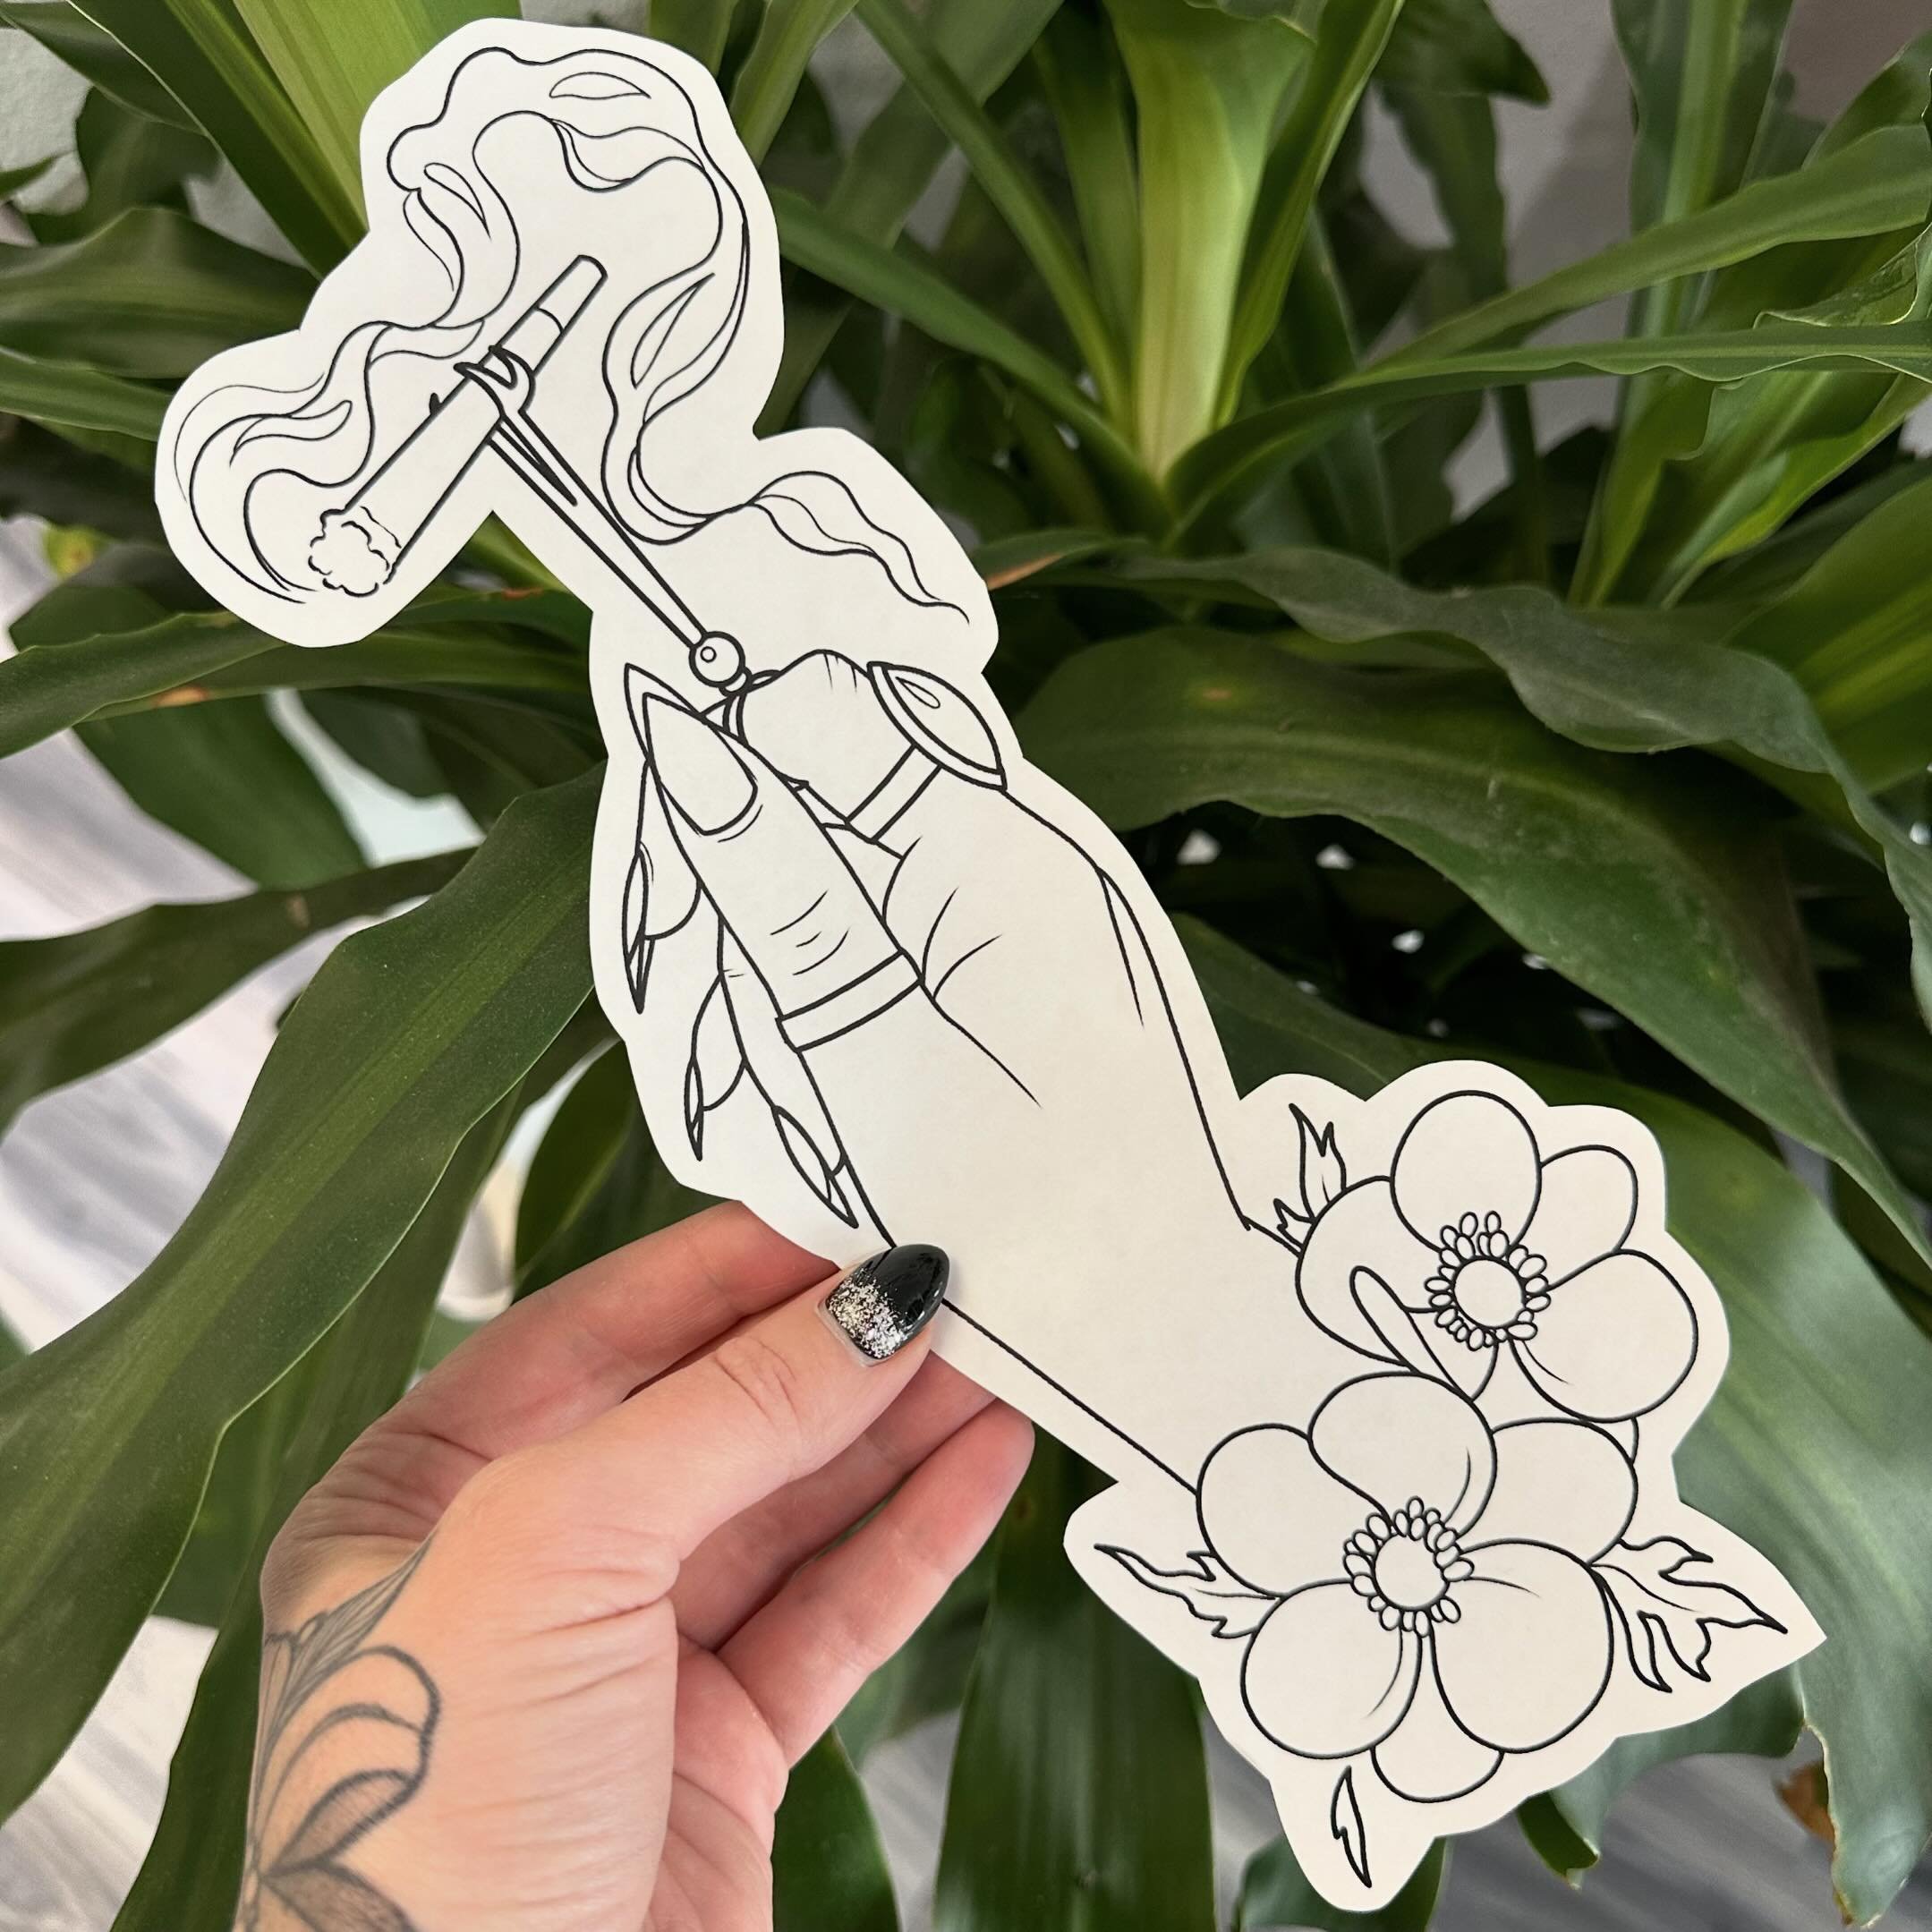 *already CLAIMED!* 

Got snagged before I could post it. Fancy witchy hand with joint holder and anemone flowers. 
.
.
.
.
.
#tattoo #tattoos #colortattoo #neotrad #neotraditional #illustrativetattoo #original #eugeneoregon #eugene #salemoregon #rose